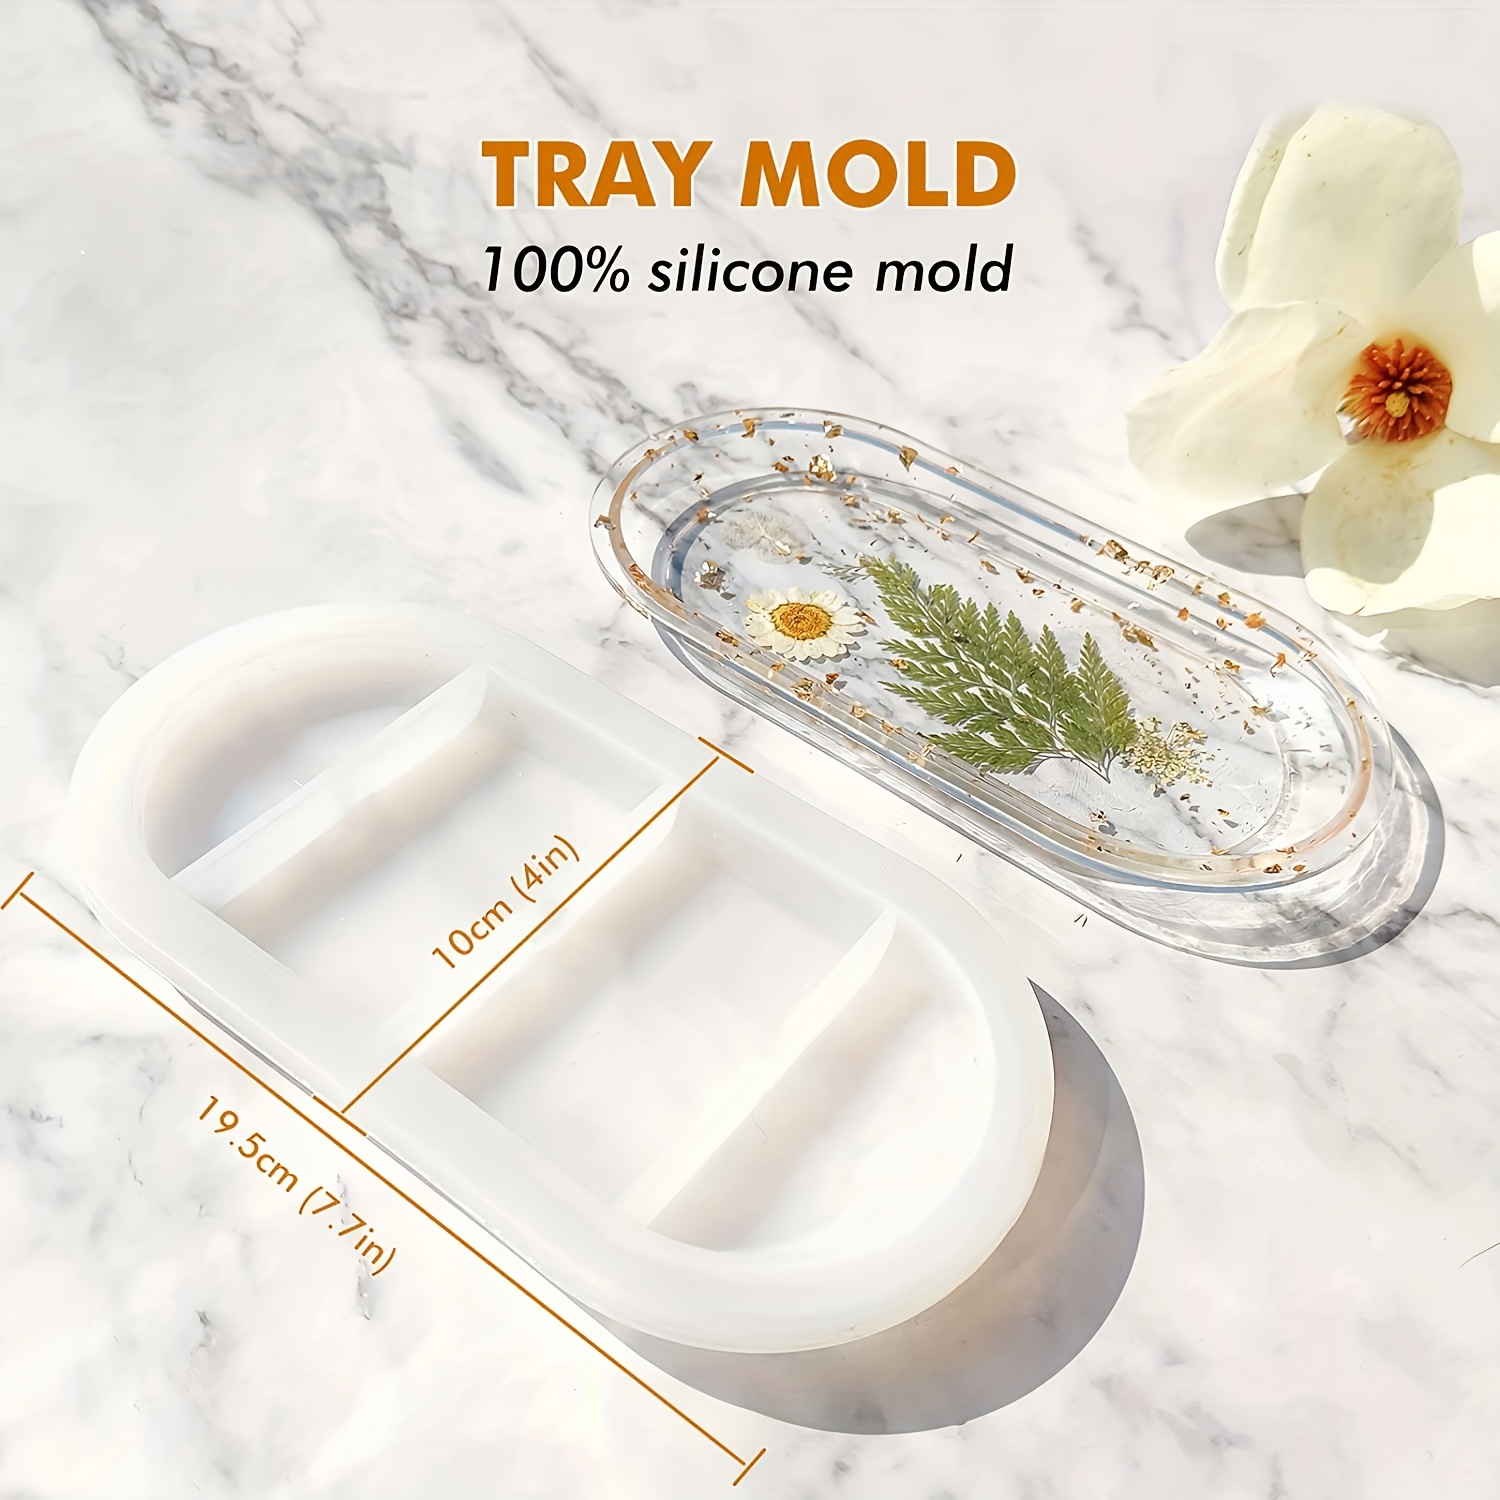 Rolling Tray Molds Ashtray Mold Silicone Herb Grinder Mold Spice Mills  Grinder Epoxy Casting Silicone Mold Rolling Tray Mold